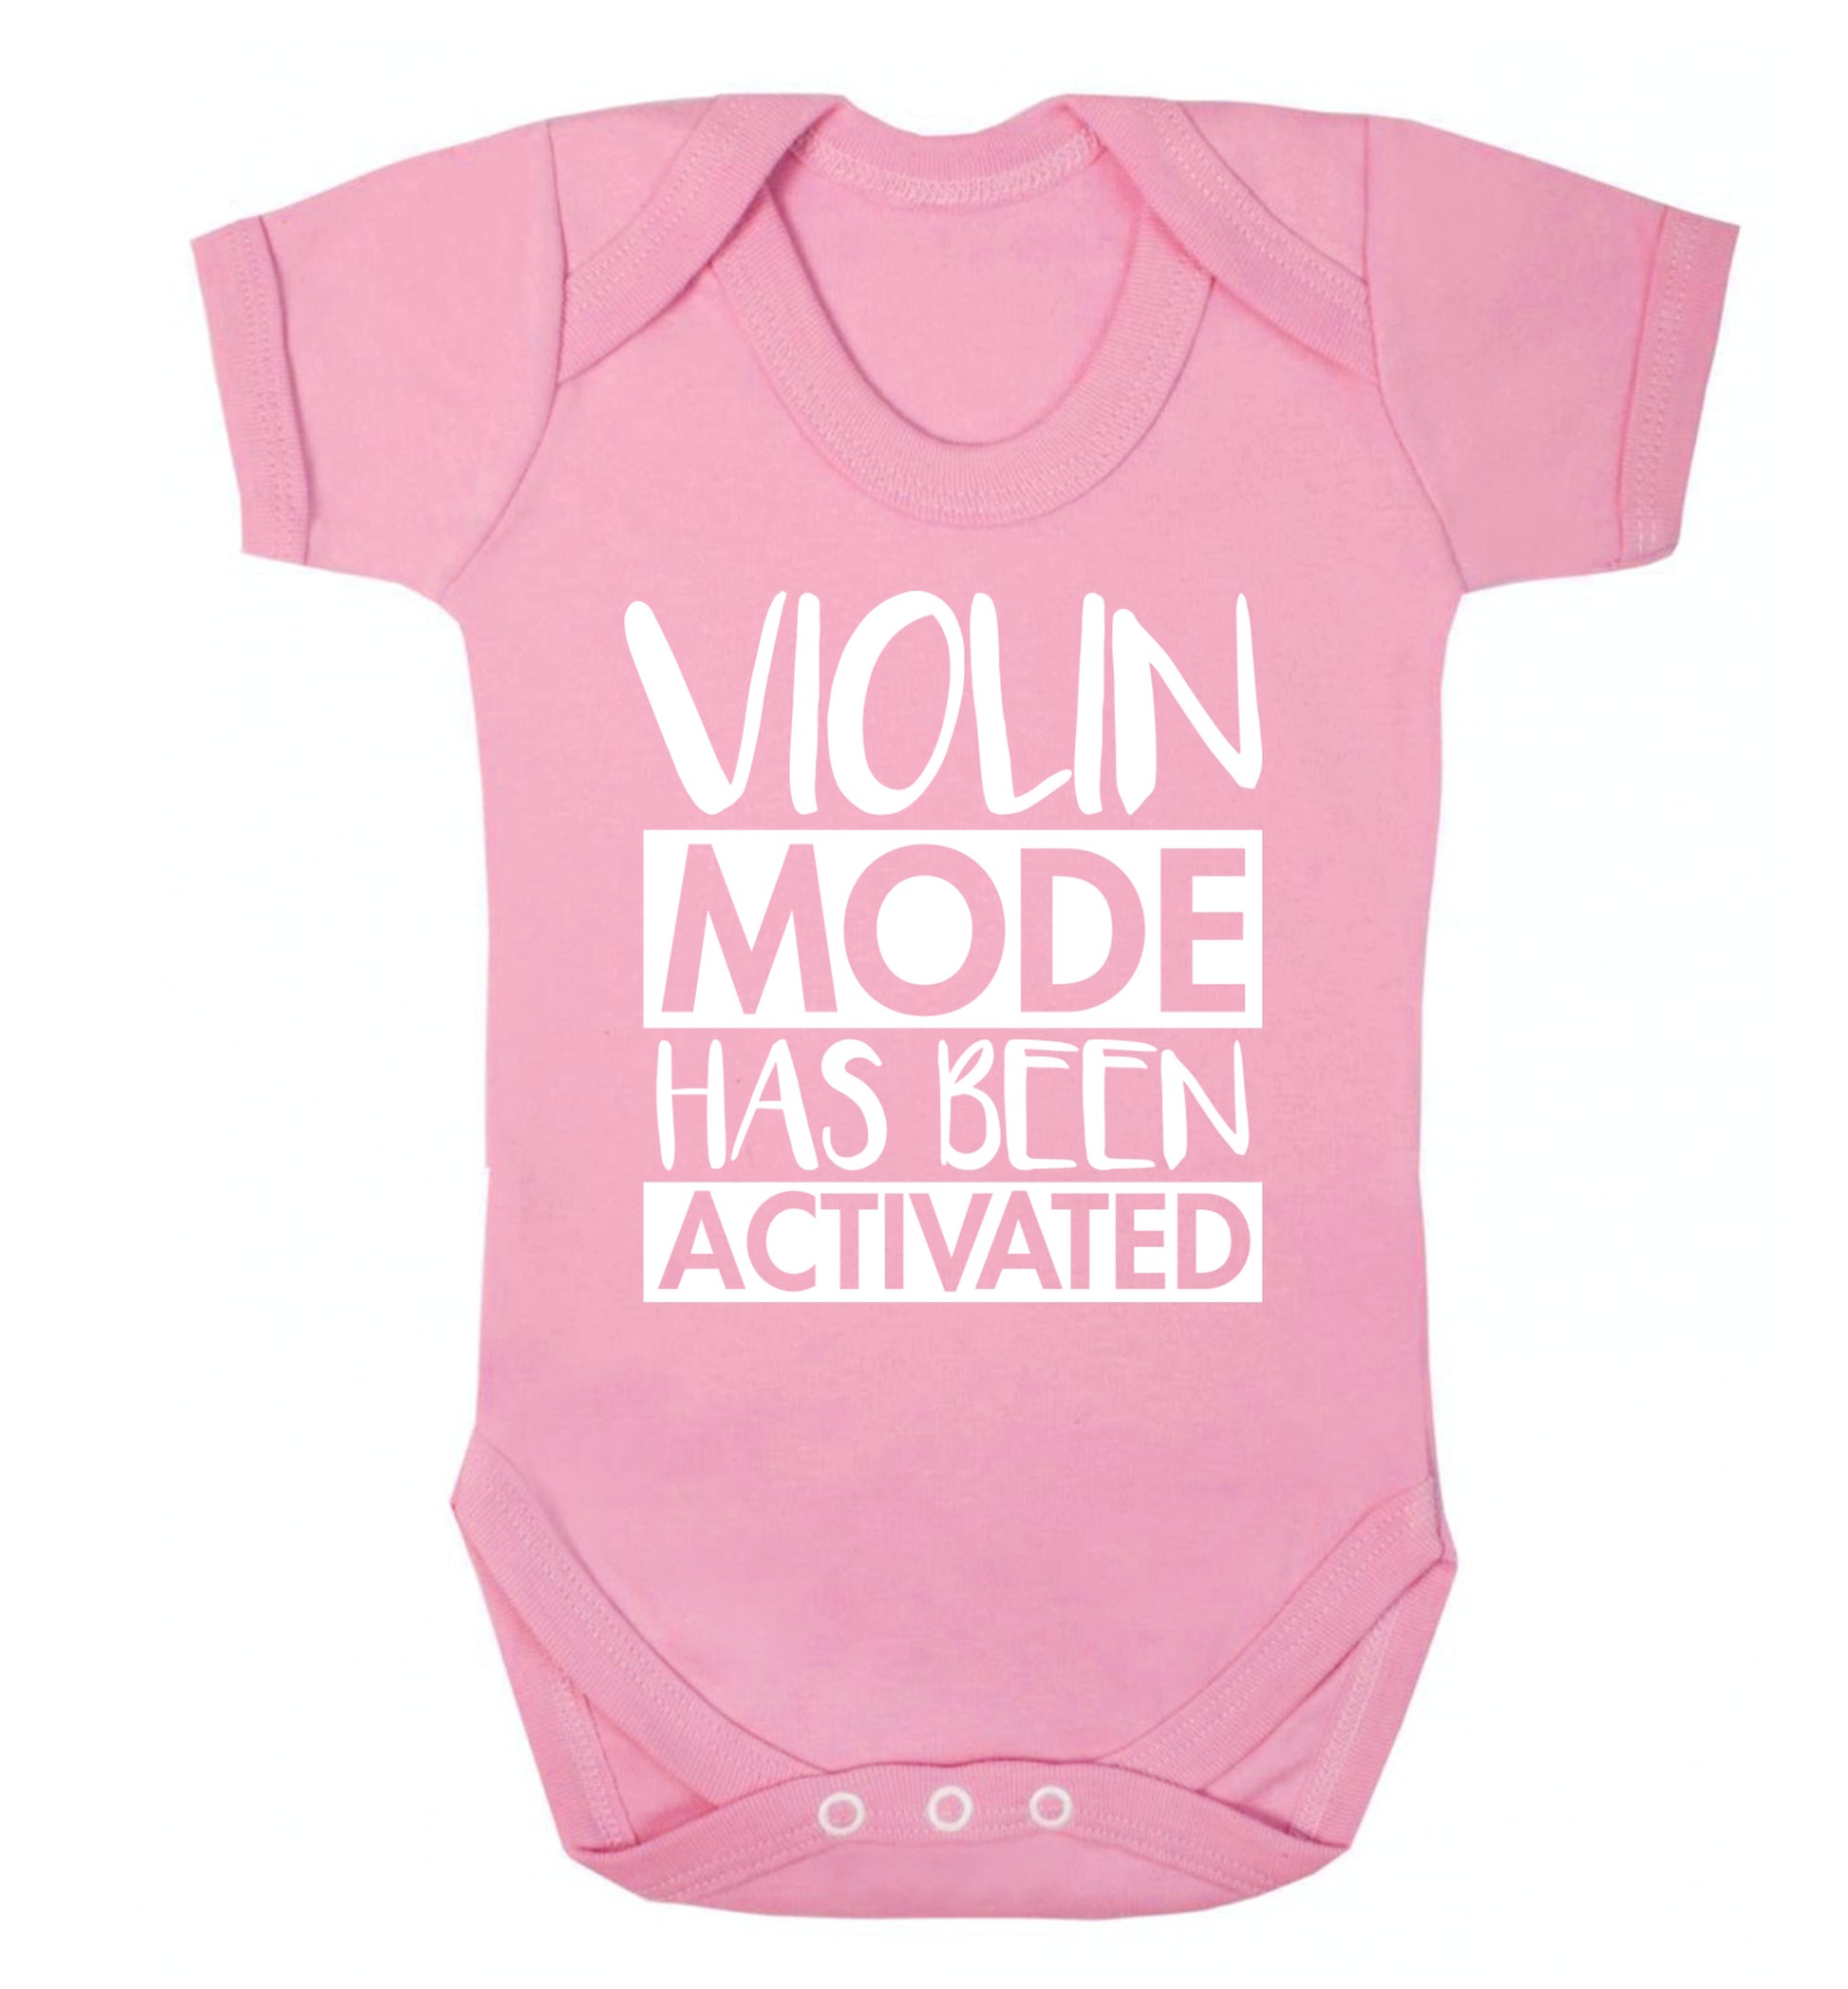 Violin Mode Activated Baby Vest pale pink 18-24 months